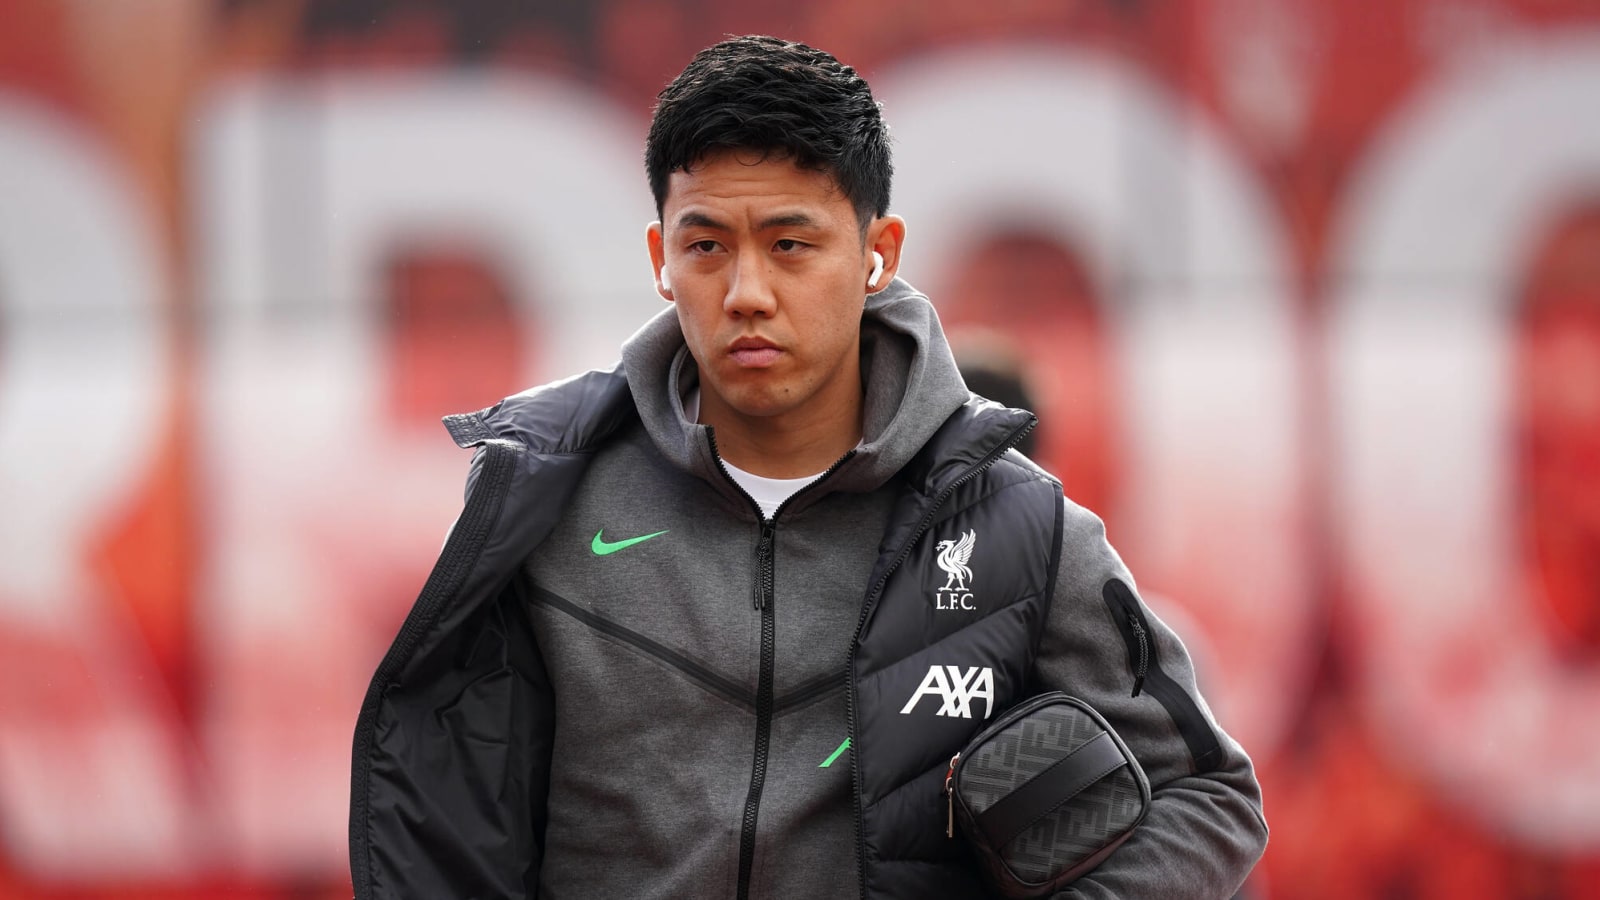 James Pearce shares news of potential Liverpool injury boost ahead of Man Utd clash